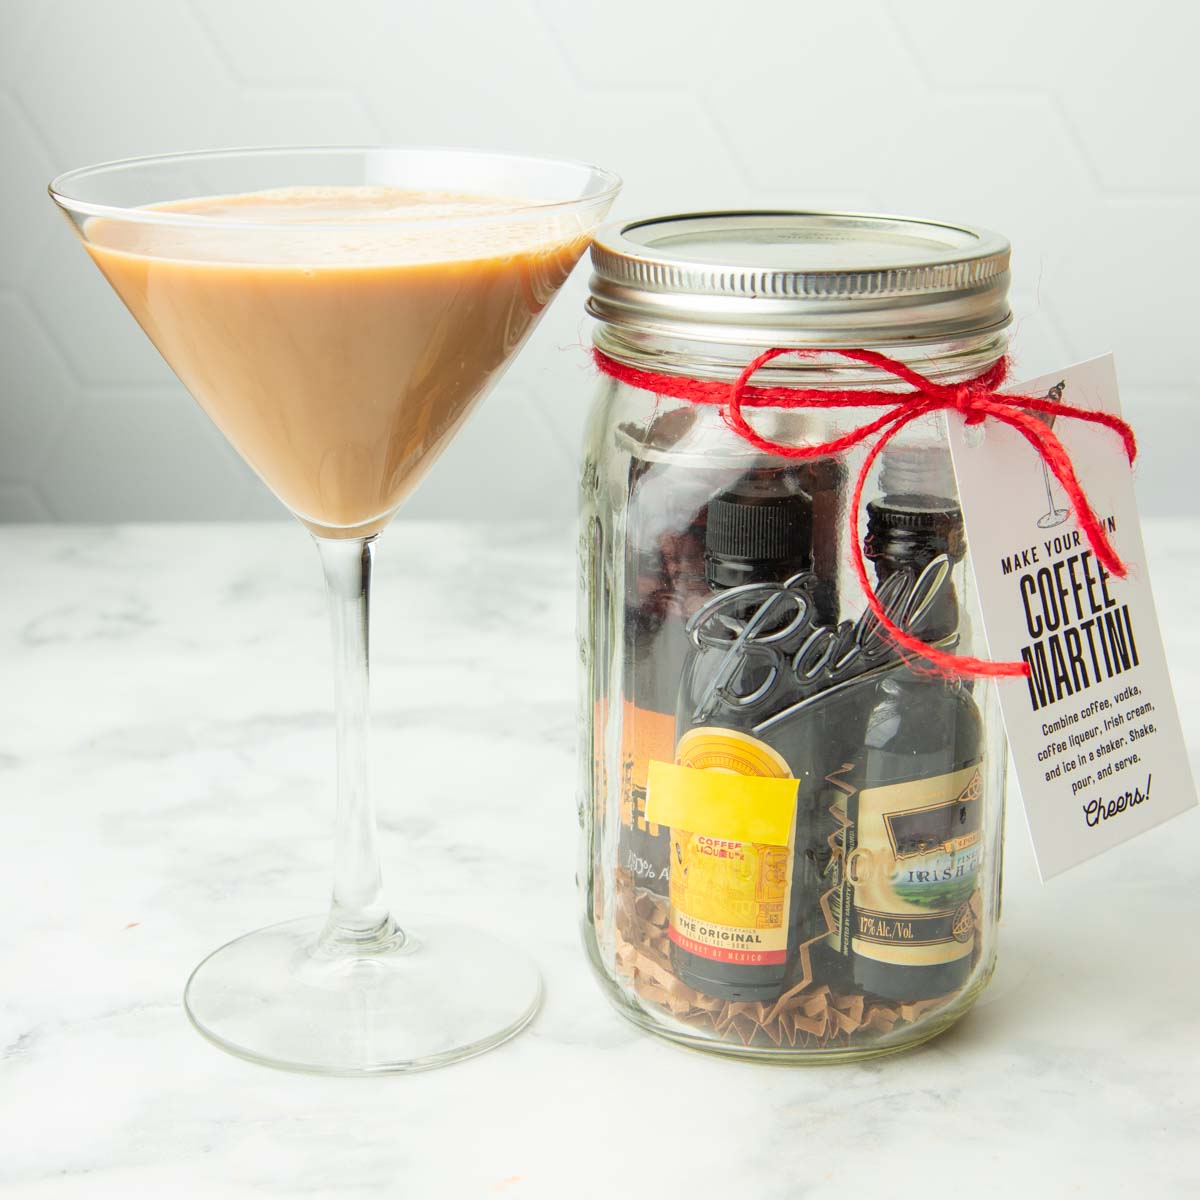 A coffee martini stands tall in a martini glass next to a diy cocktail kit in a mason jar.